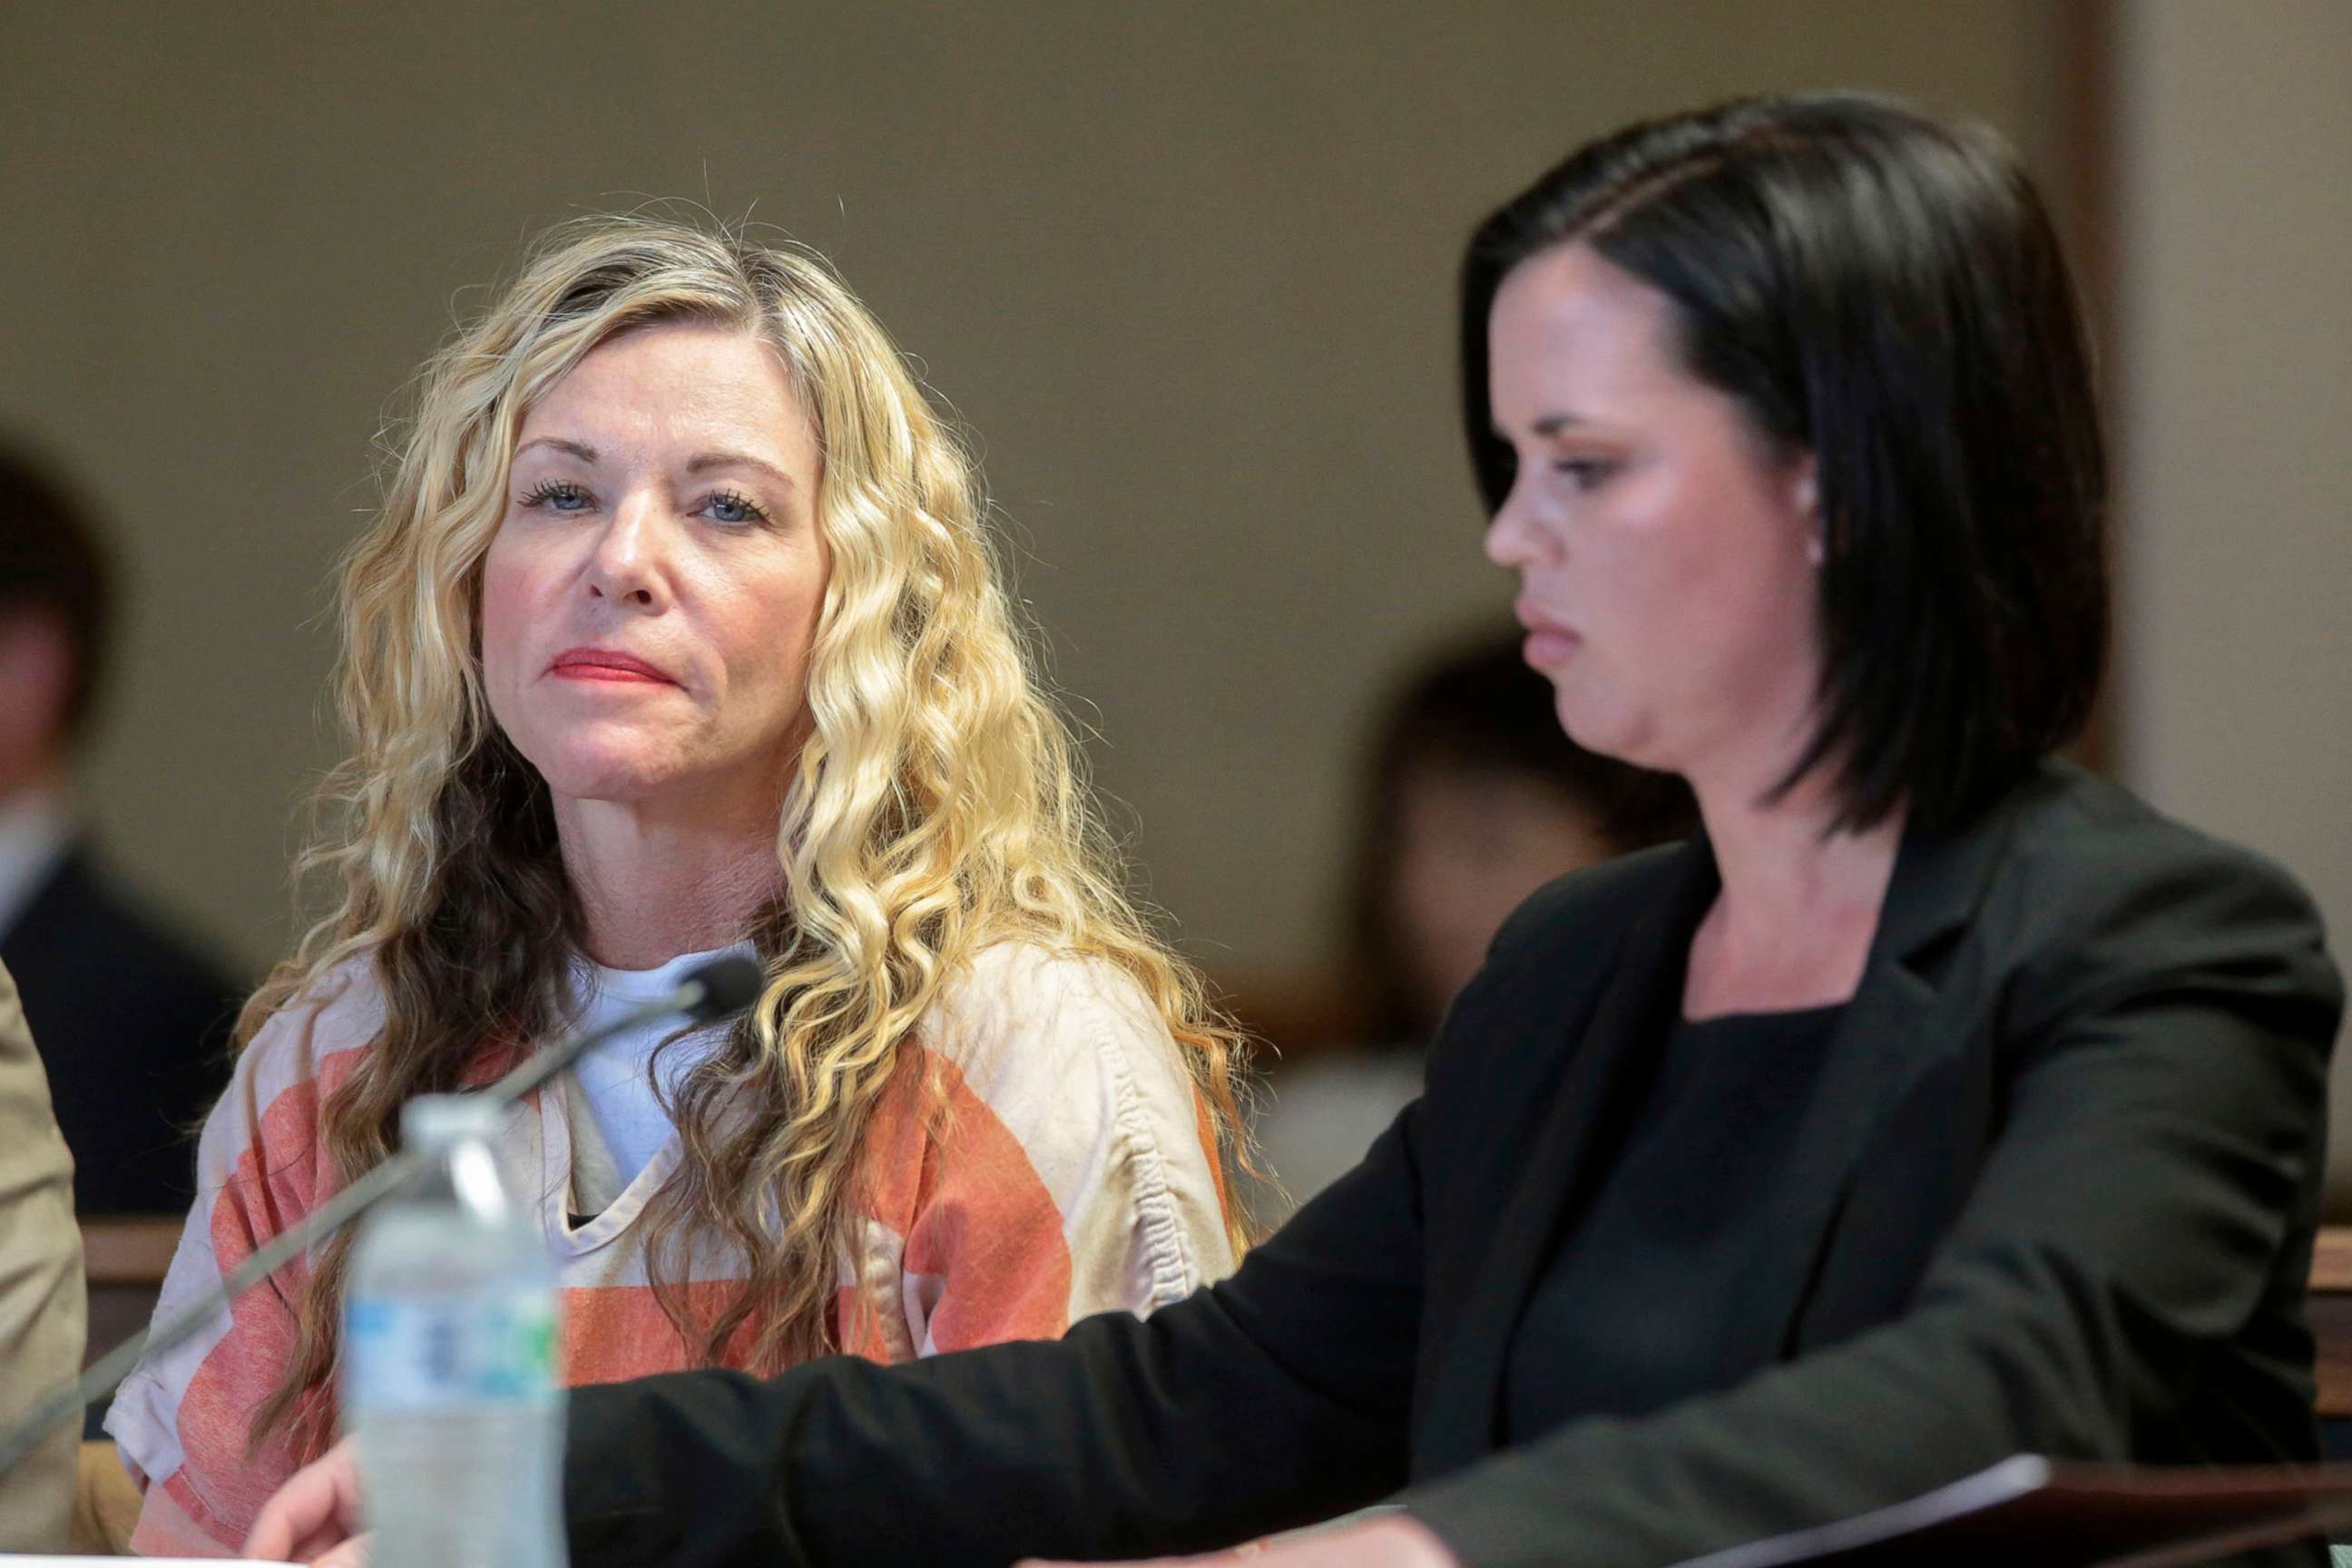 PHOTO: In this March 6, 2020, file photo, Lori Vallow Daybell glances at the camera during her hearing in Rexburg, Idaho.